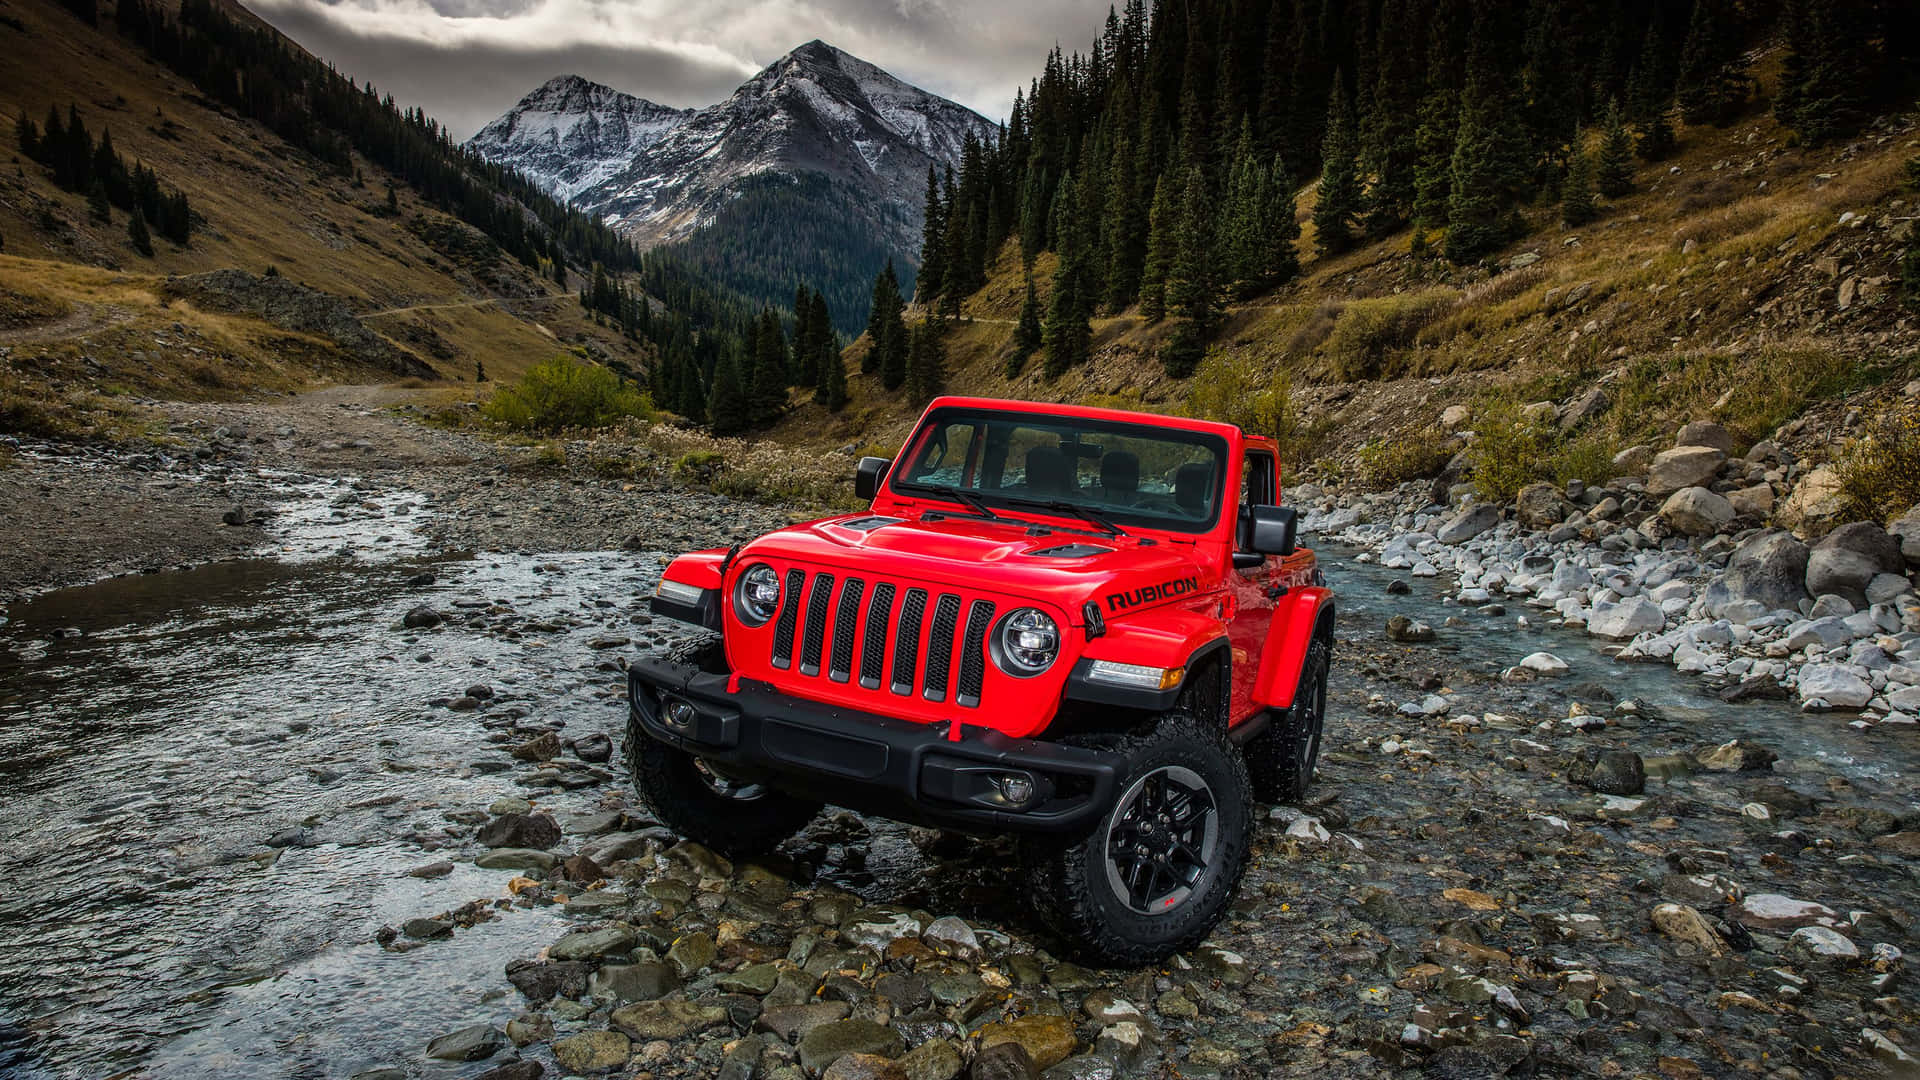 A Red Jeep Is Parked In A Stream In The Mountains